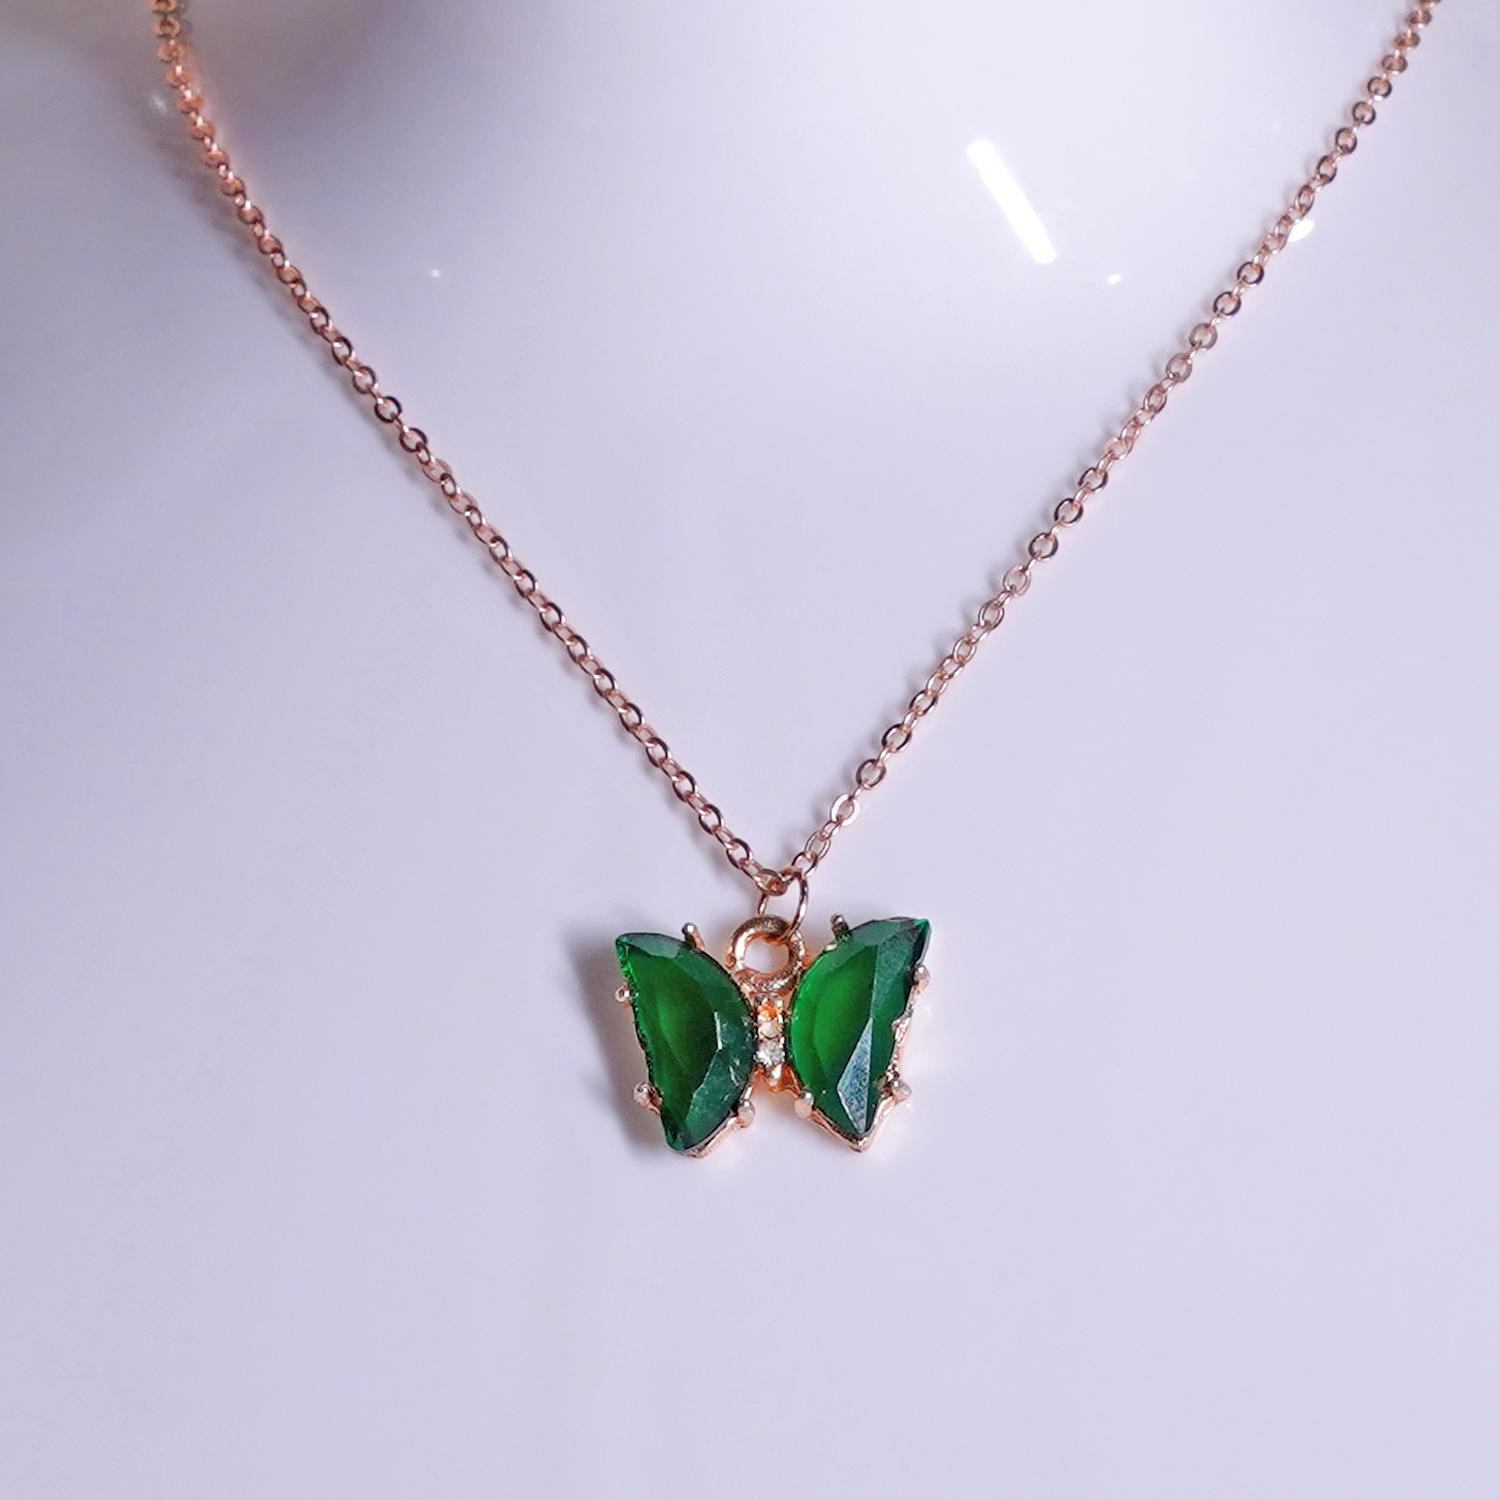 Gold & Green Crystal Butterfly Necklace, New Statement Everyday Necklace,  Gift | eBay